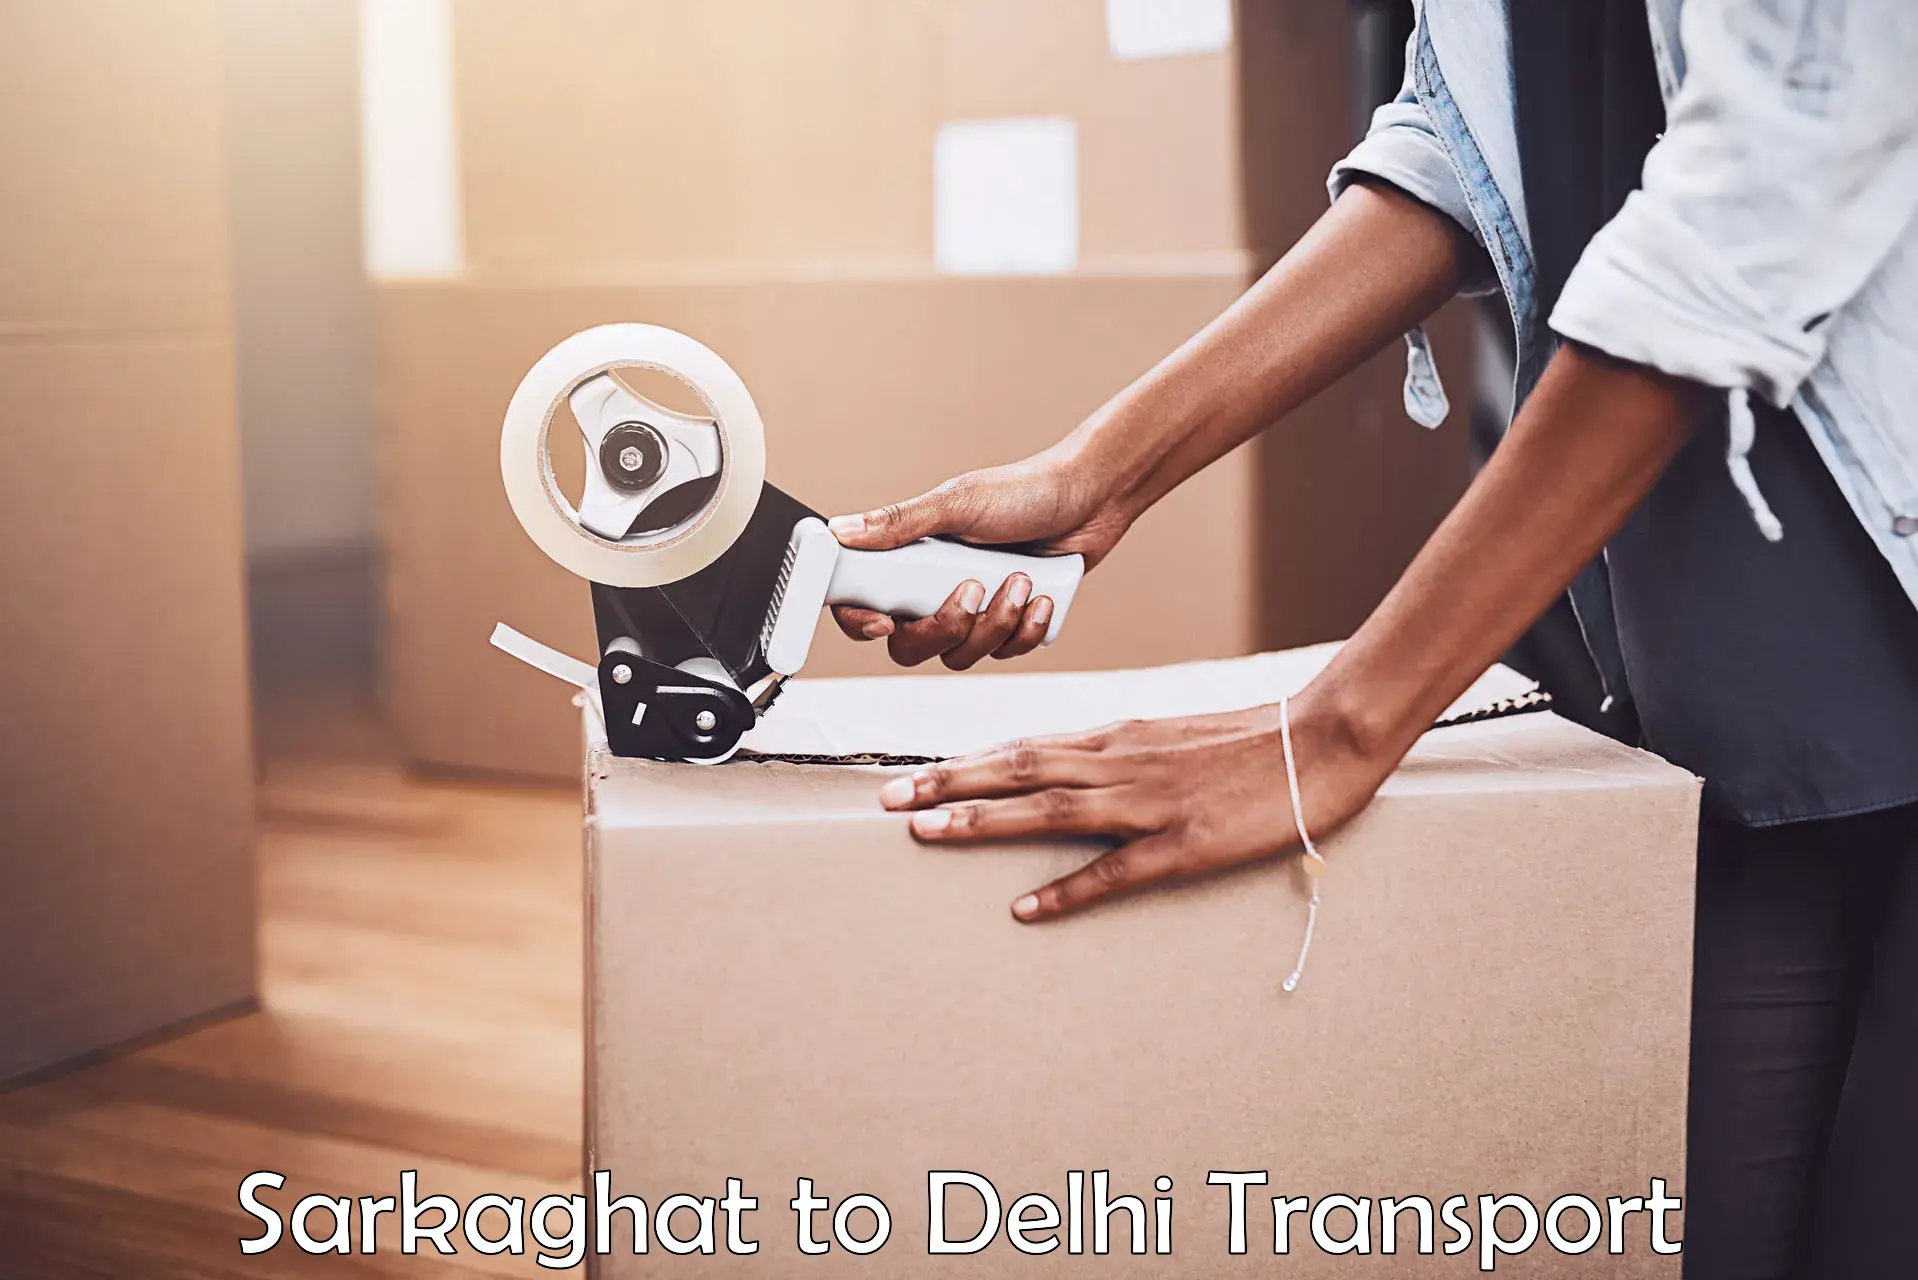 Bike shipping service Sarkaghat to East Delhi